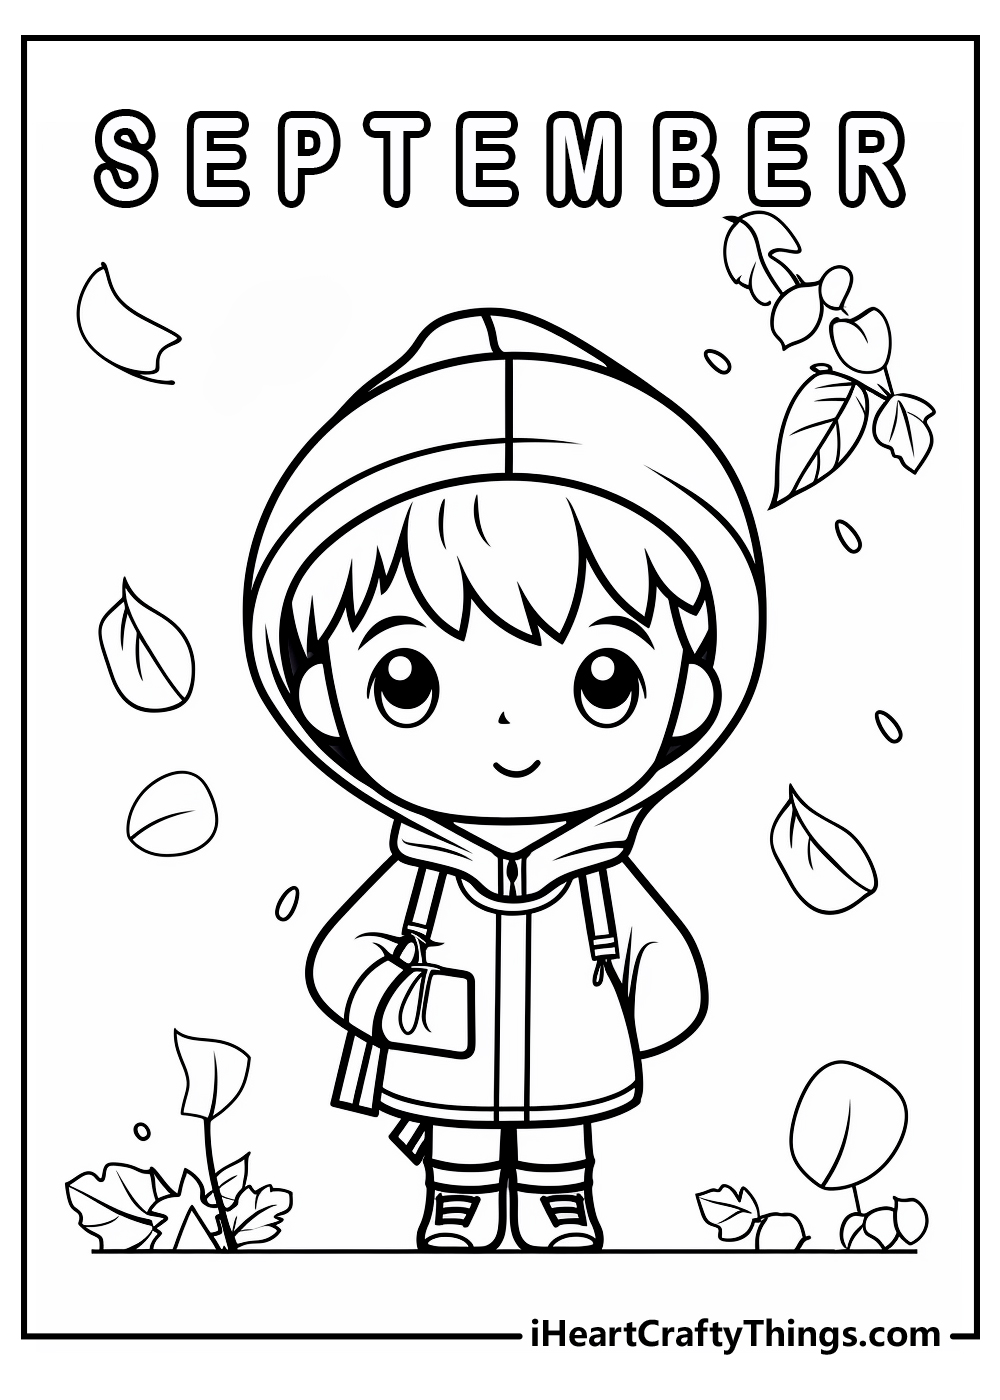 september coloring pages for kids